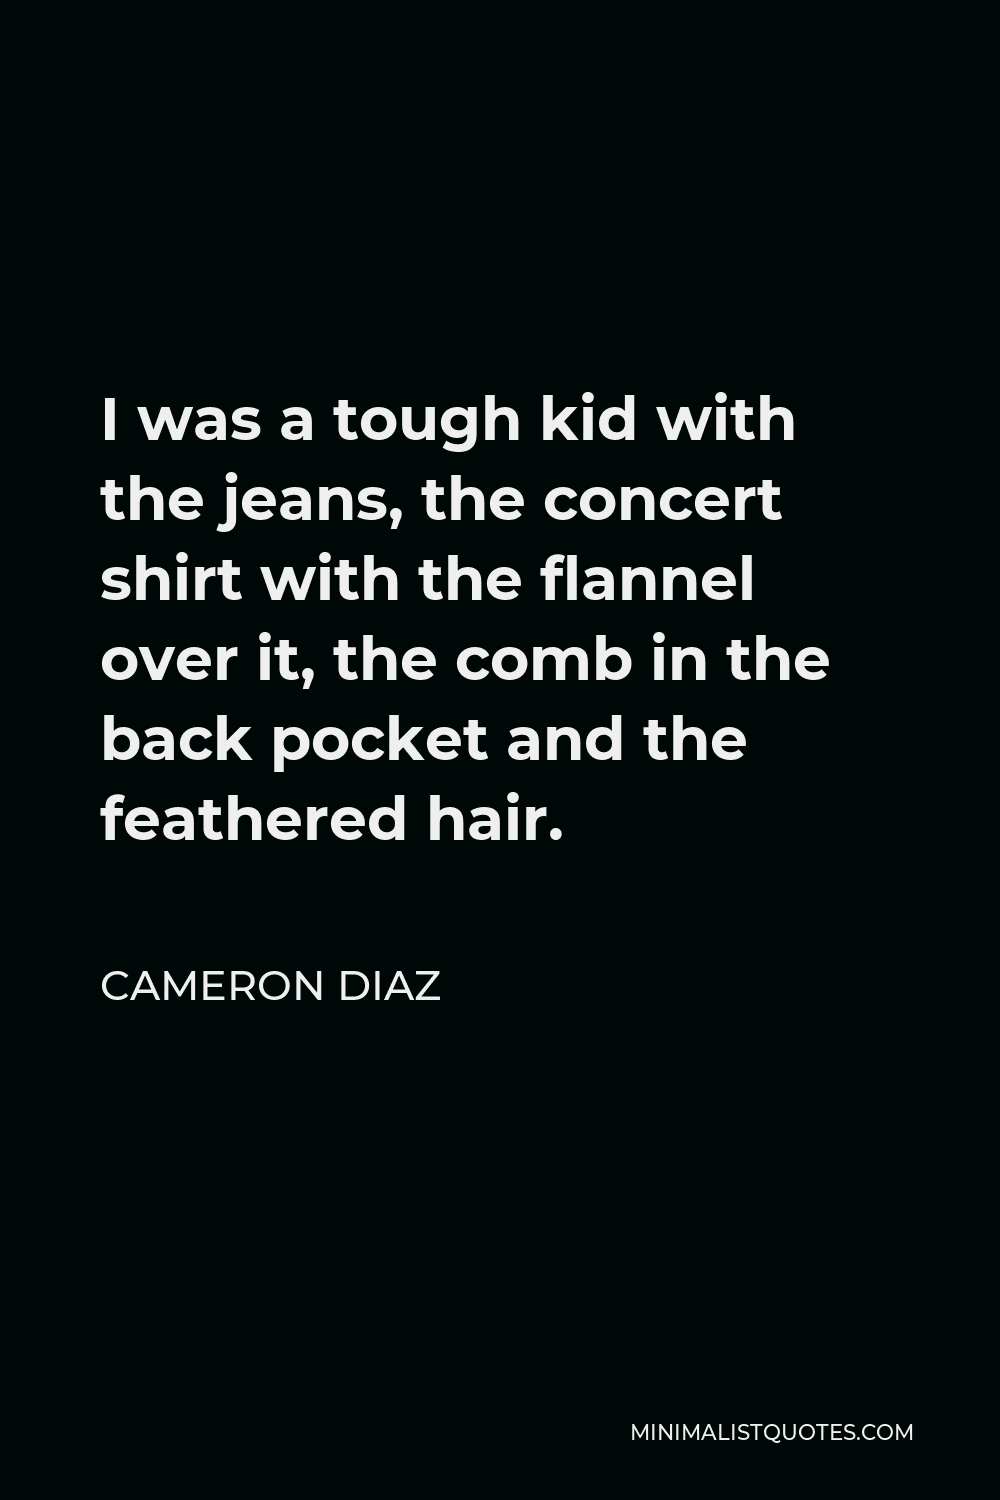 Cameron Diaz Quote - I was a tough kid with the jeans, the concert shirt with the flannel over it, the comb in the back pocket and the feathered hair.